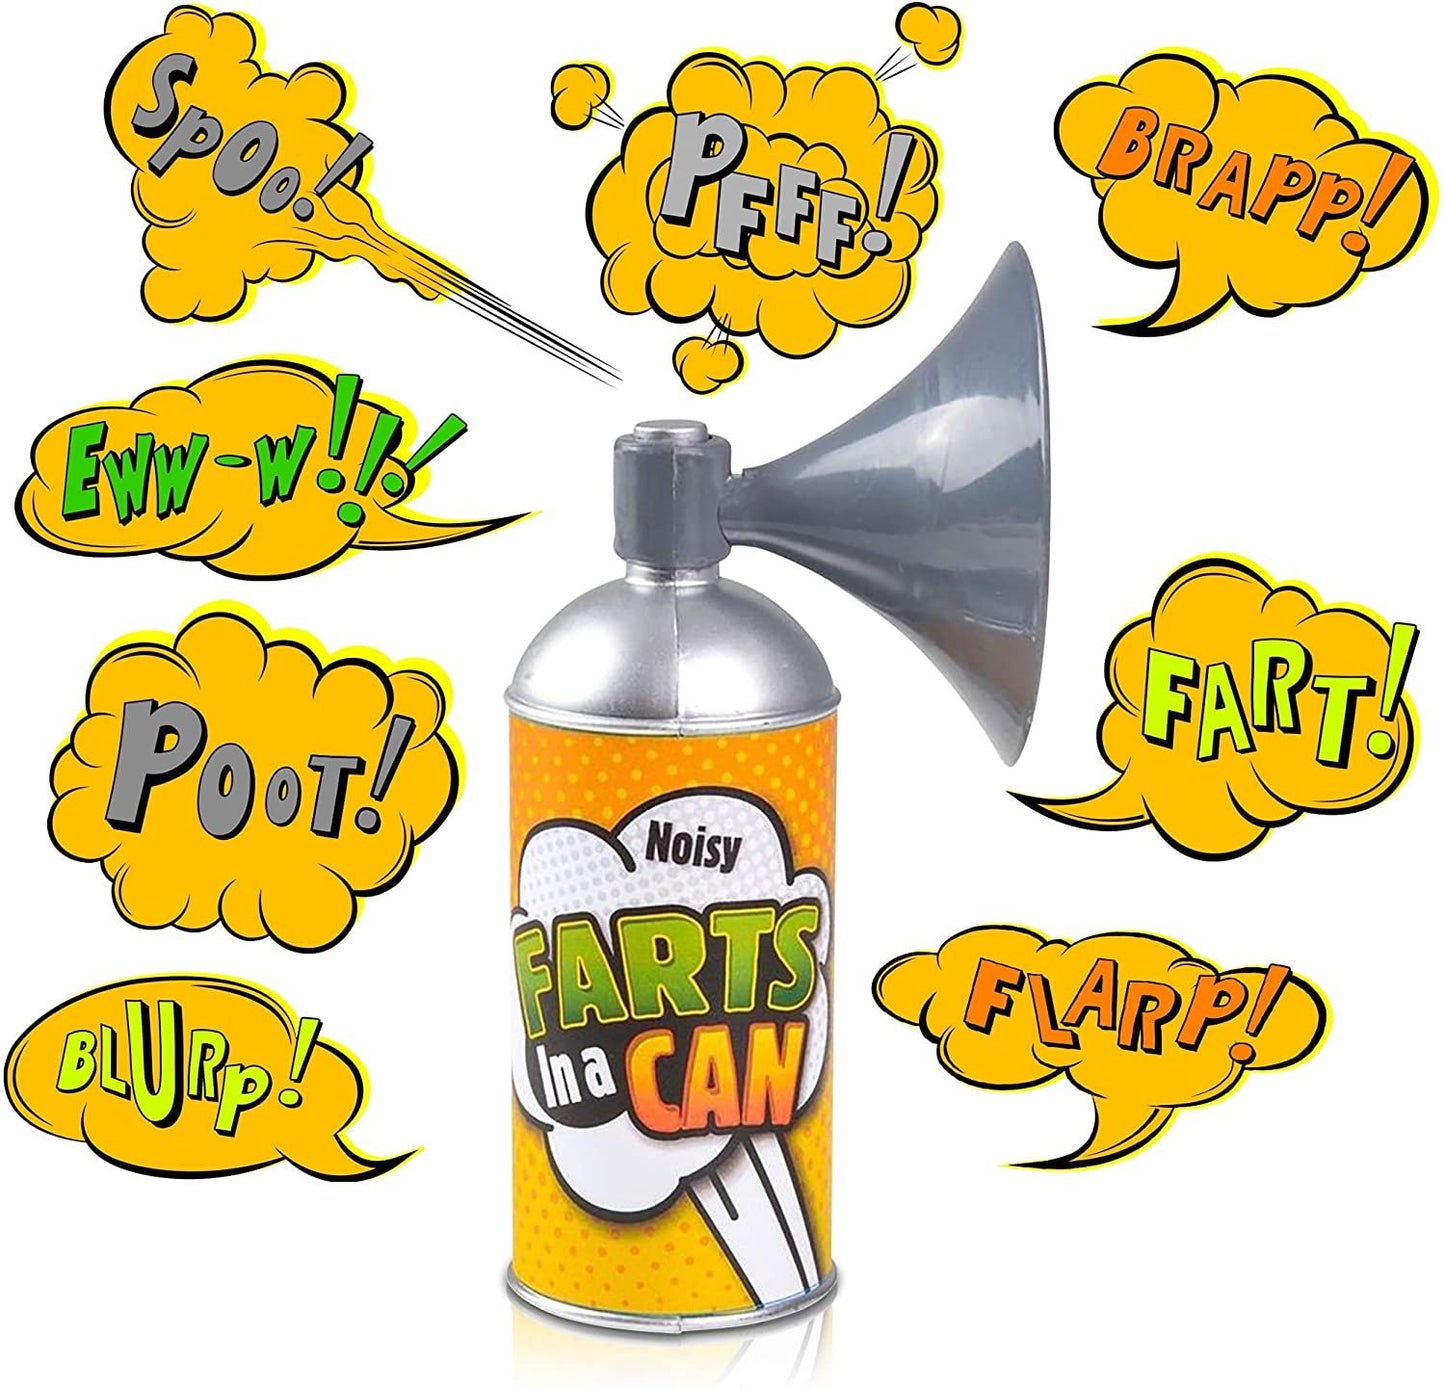 ArtCreativity 6 Inch Fart in a Can Machine with 6 Hilarious Sounds - Prank Farting Sound Toy for Kids and Adults - 100% Odorless - Loud Bullhorn - Funny Gag Joke Gift for Boys, Girls, Men and Women